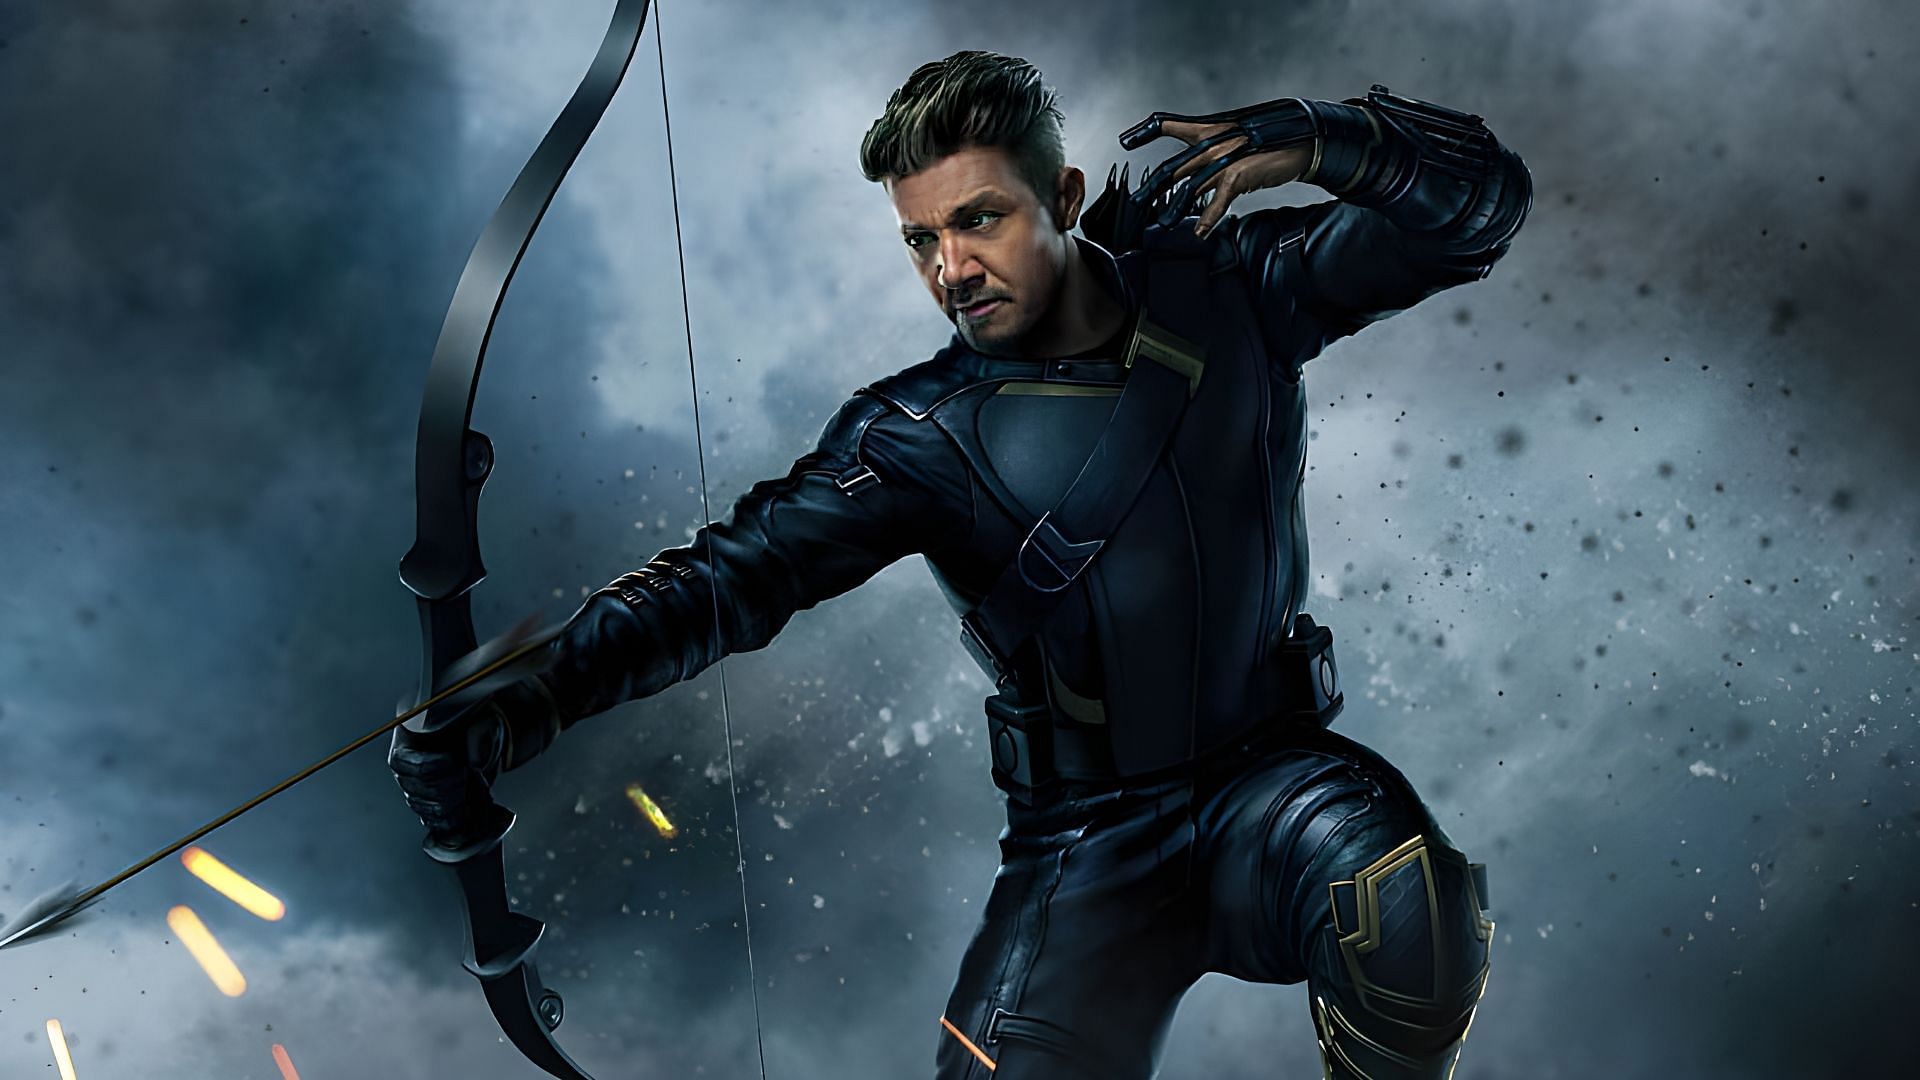 Hawkeye is a skilled strategist and tactician, able to come up with plans on the fly and adapt to changing situations. (Image via Marvel)